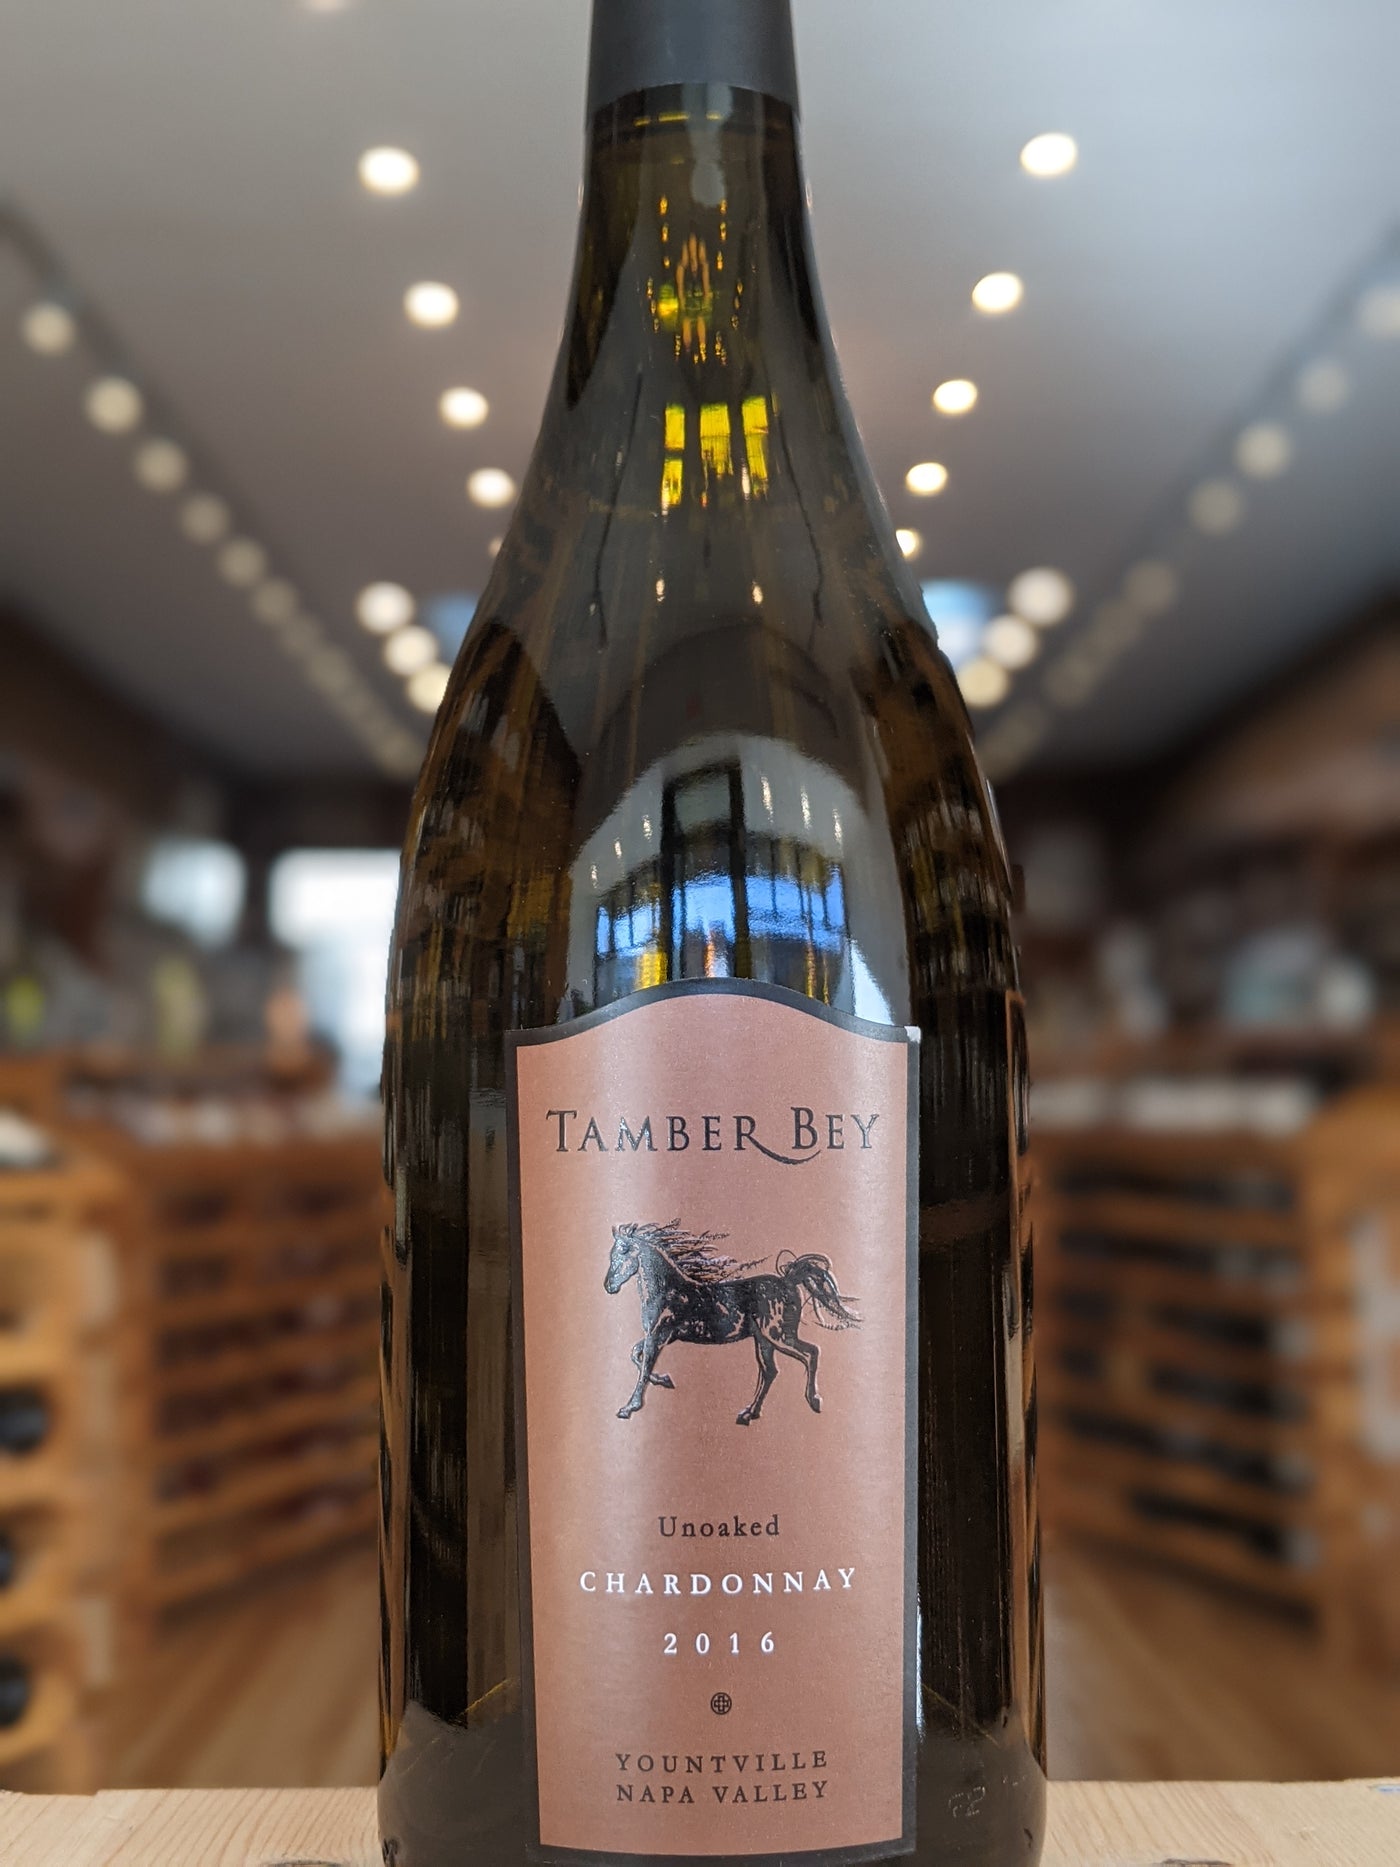 Tamber Bey Unoaked Chard 2016